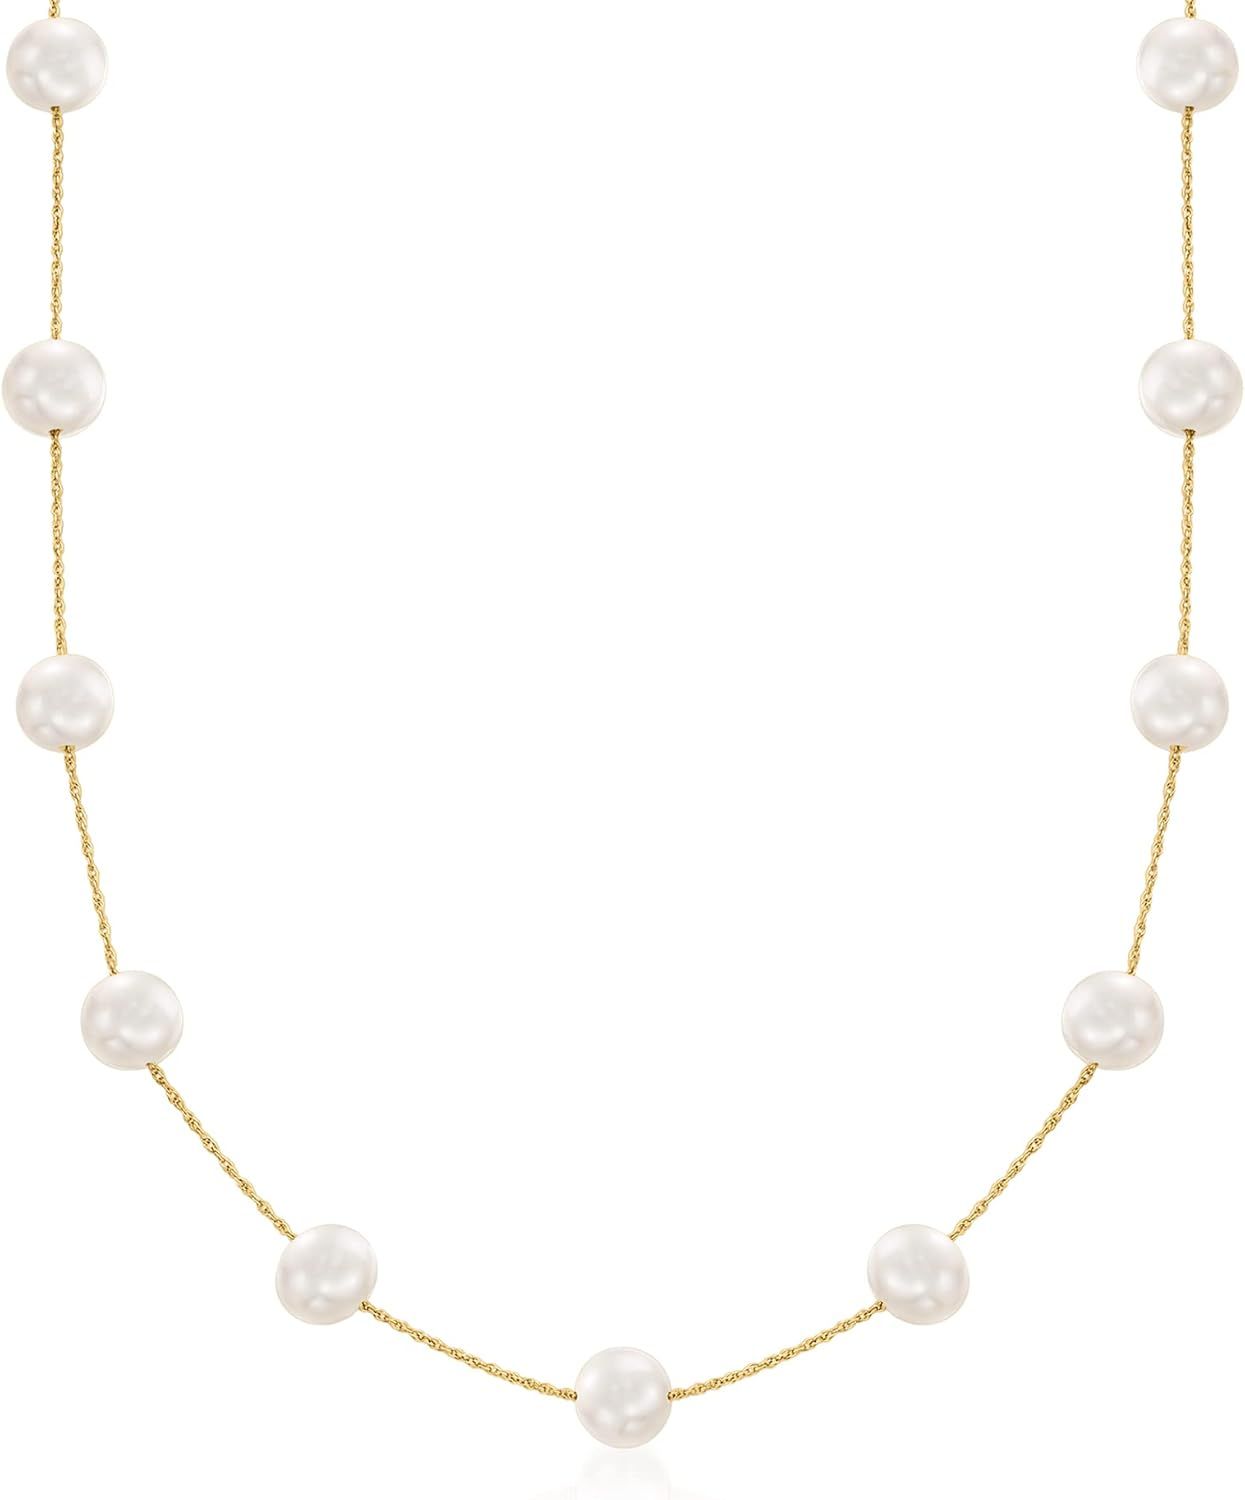 Ross-Simons 7-7.5mm Cultured Pearl Station Necklace in 14kt Yellow Gold | Amazon (US)